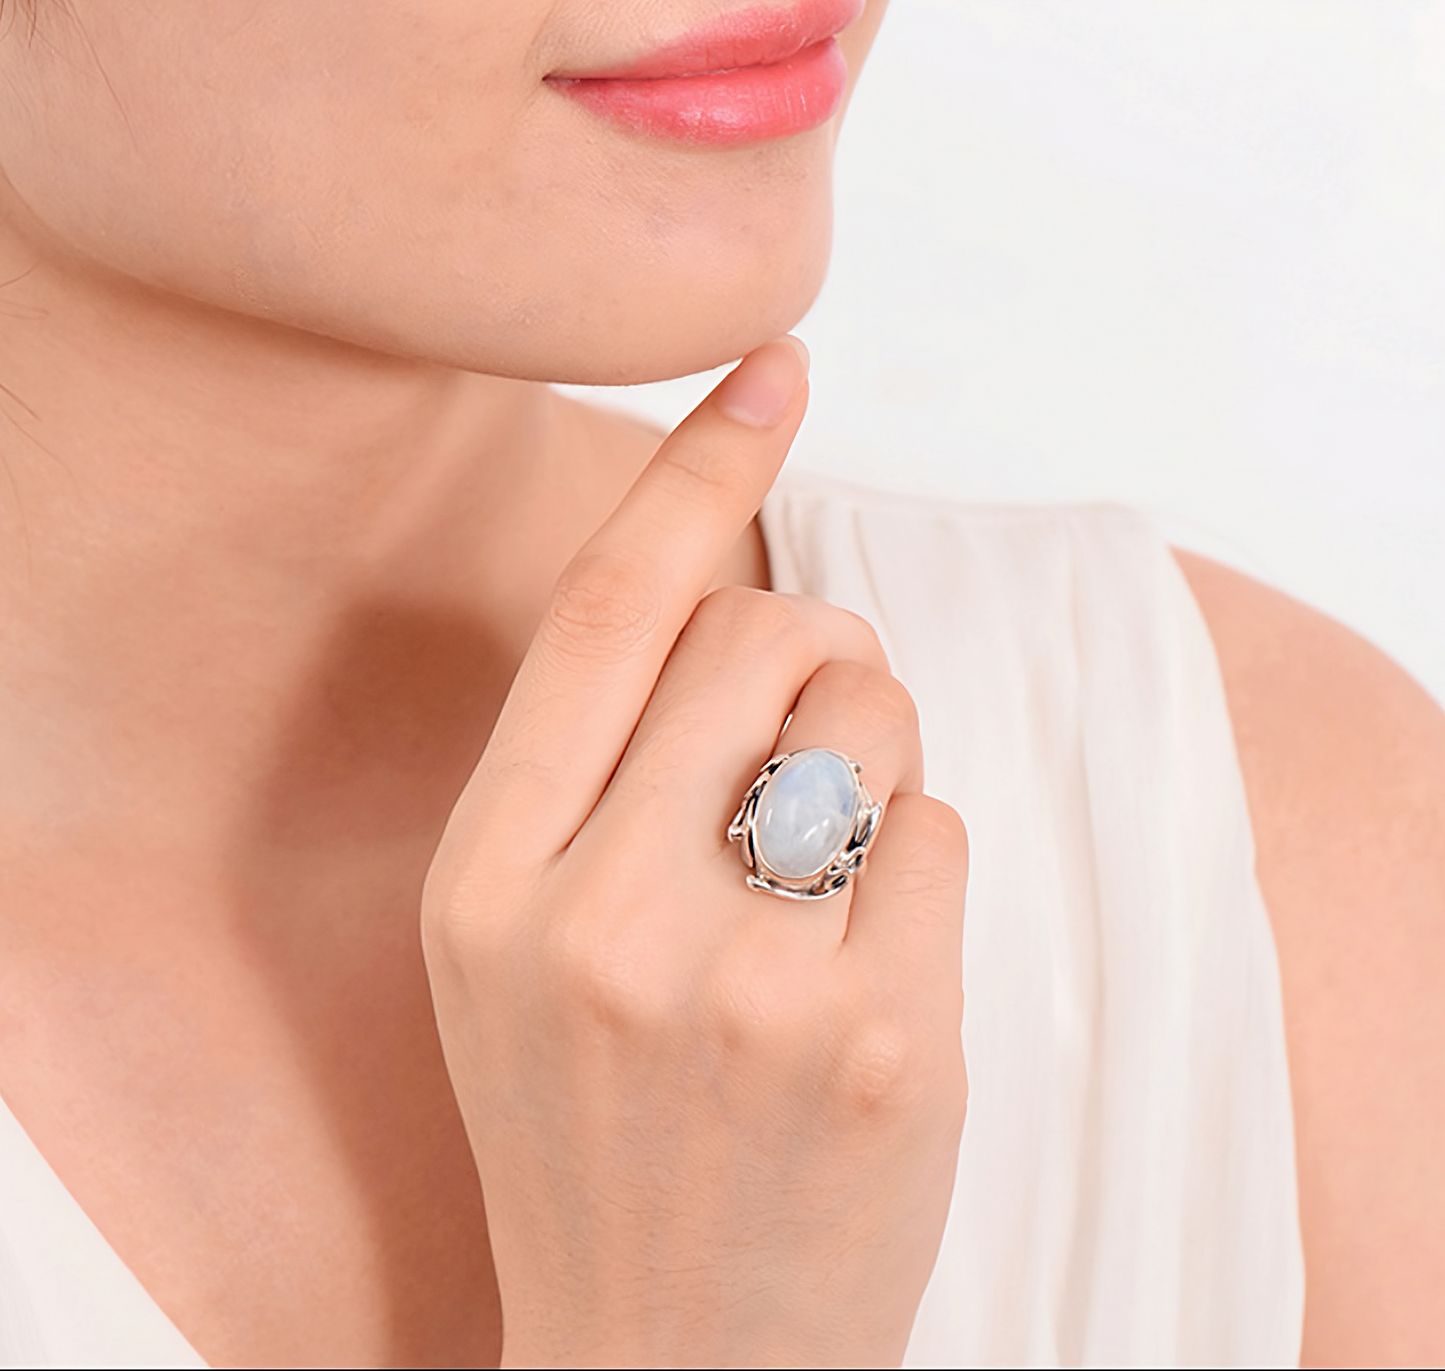 Our Cellacity Oval White Opal Ring - Perfect for Women Who Love Timeless Style - VHD